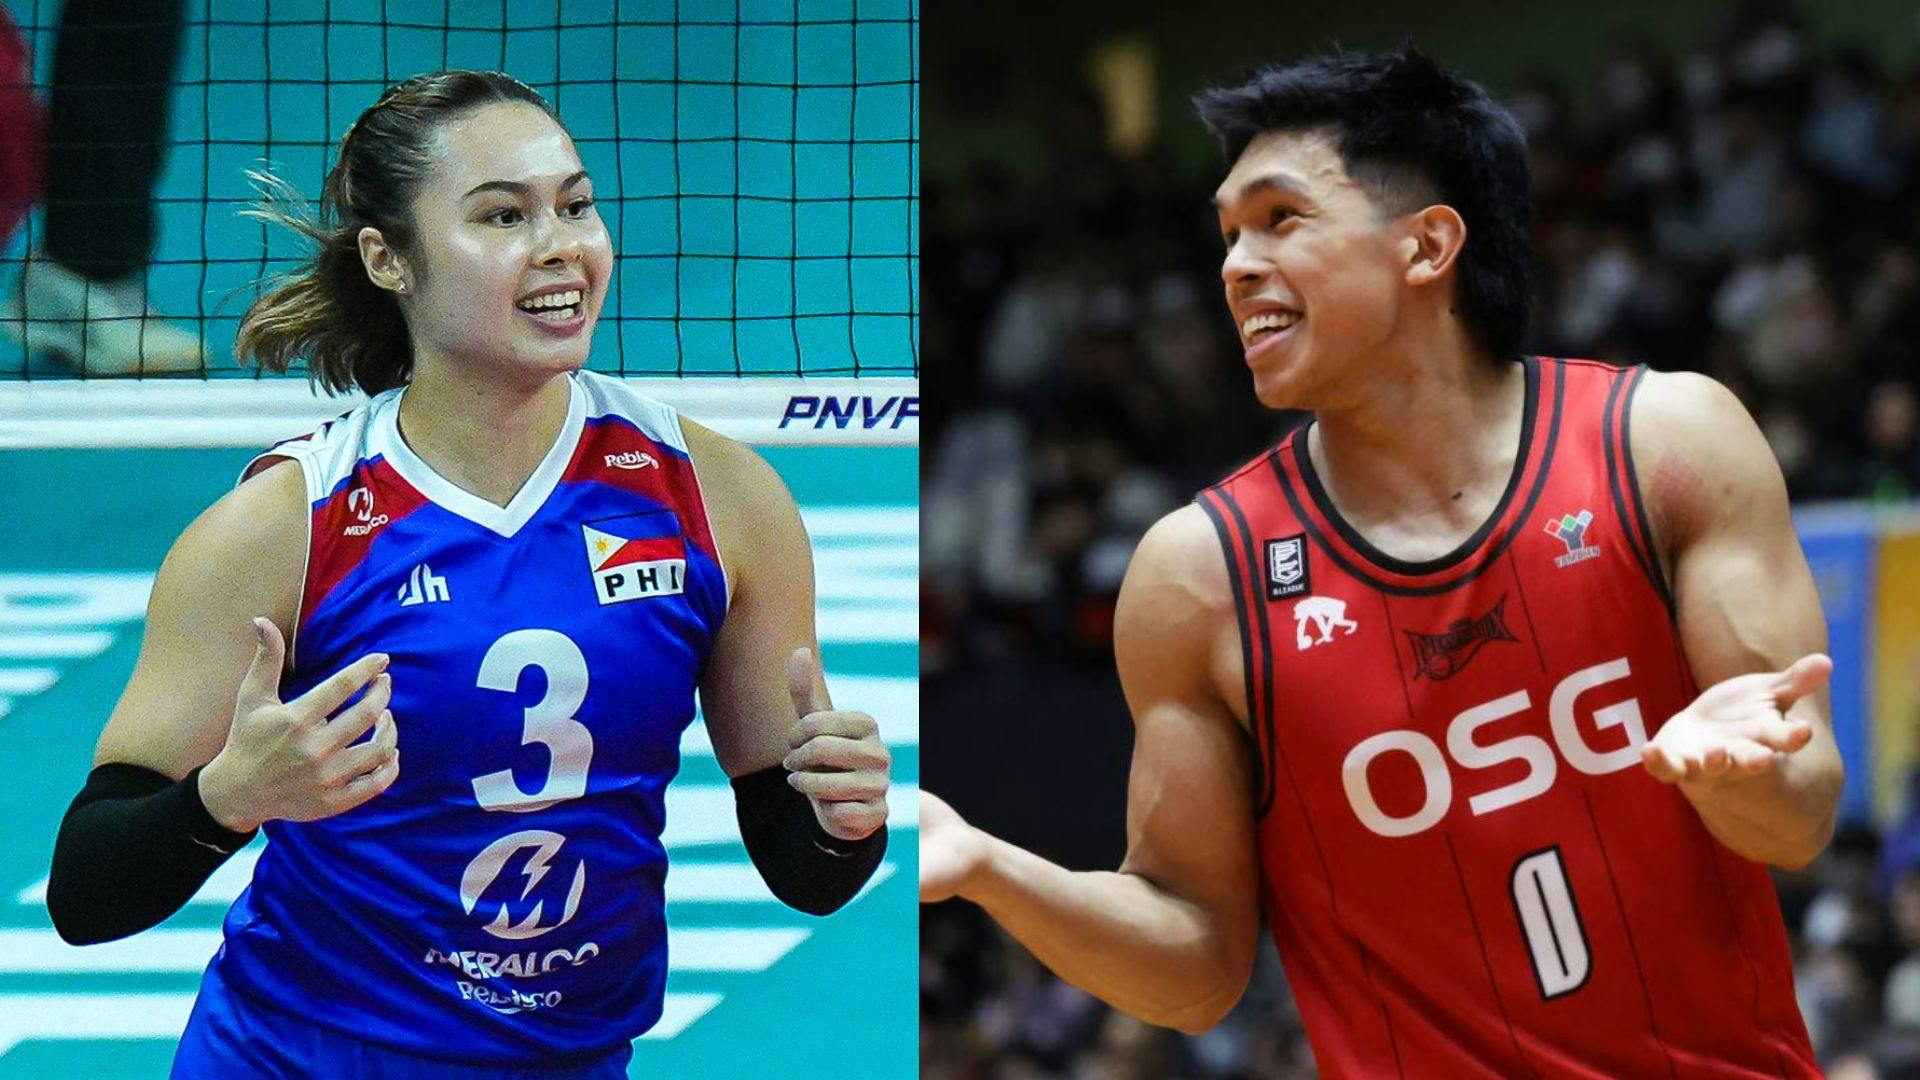 Thirdy Ravena gets heartfelt message from Vanie Gandler after winning Impressive Asia Player of the Year award in Japan